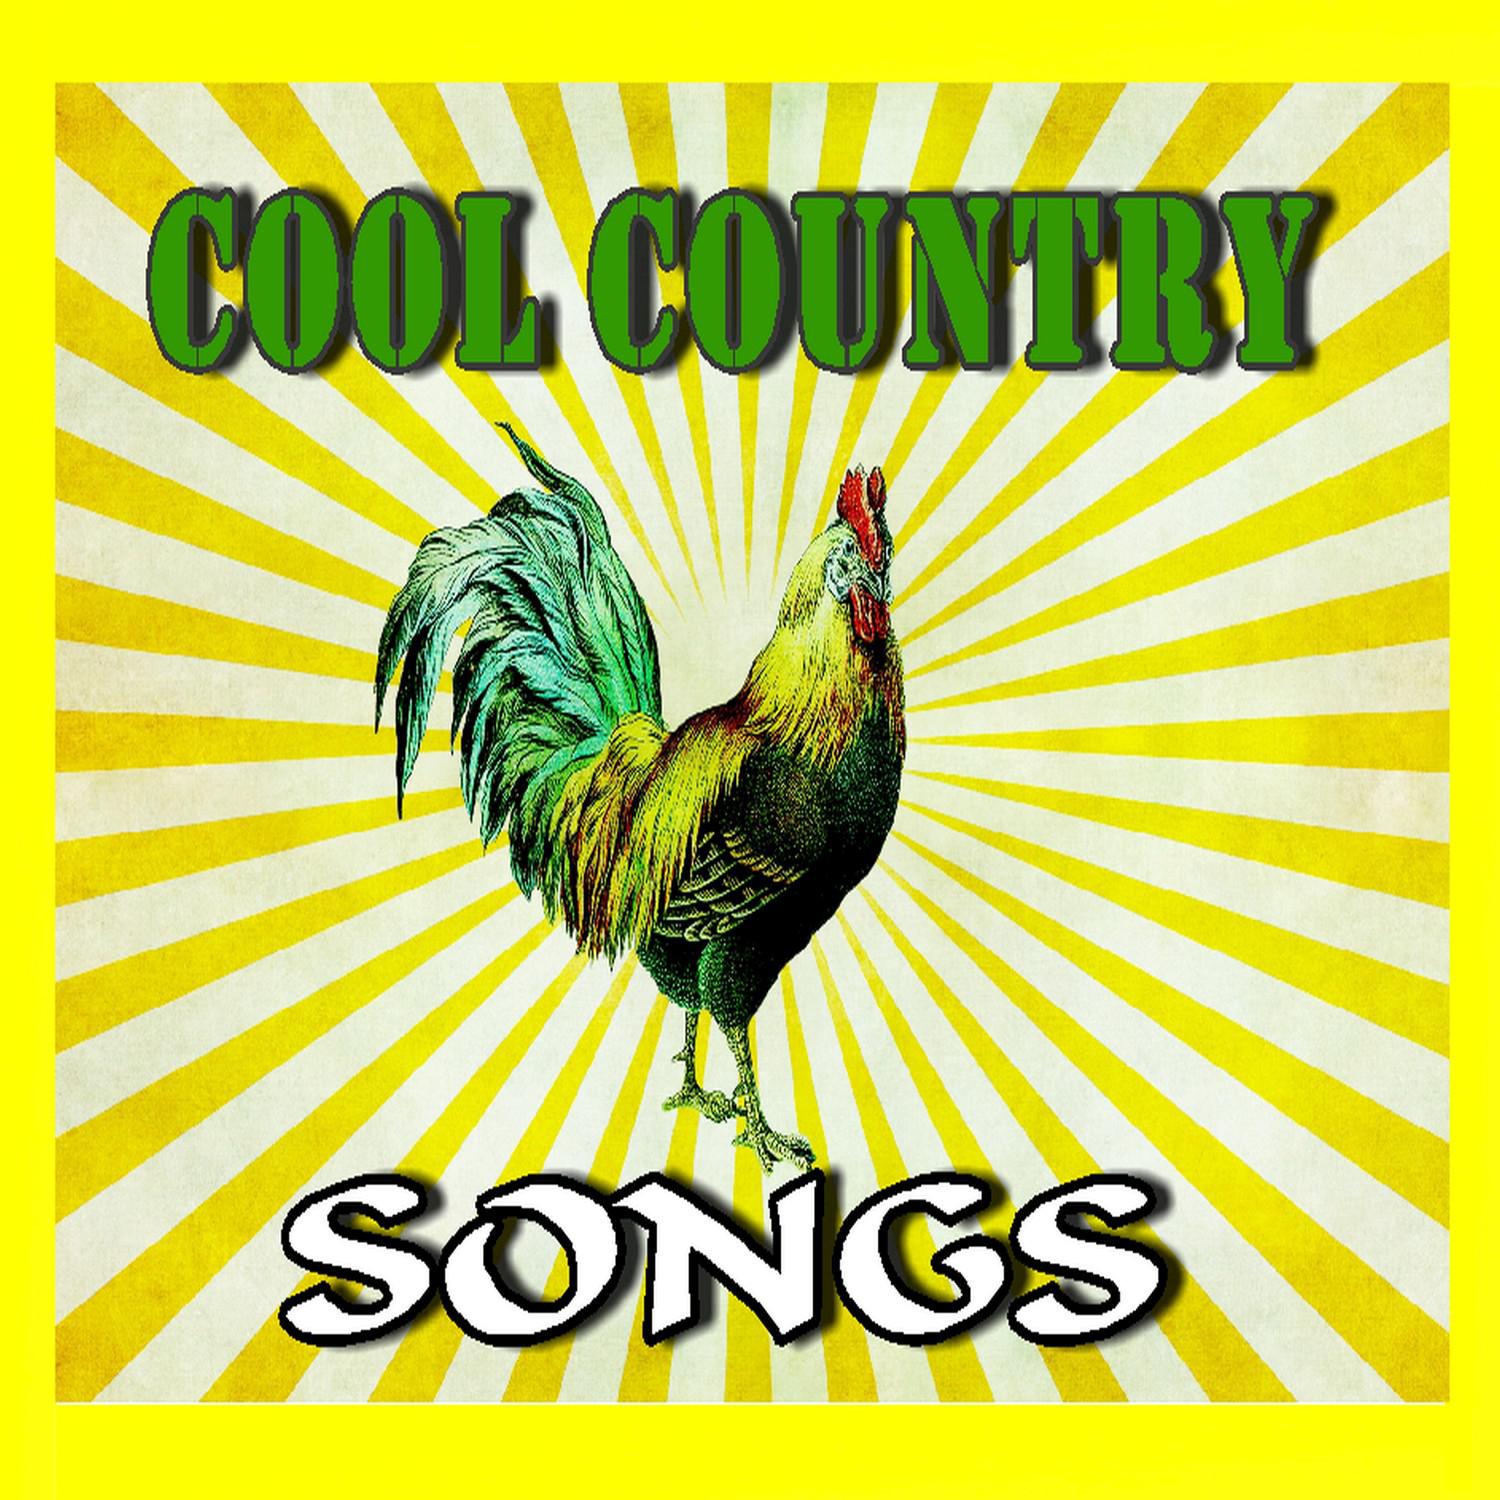 Cool Country Songs